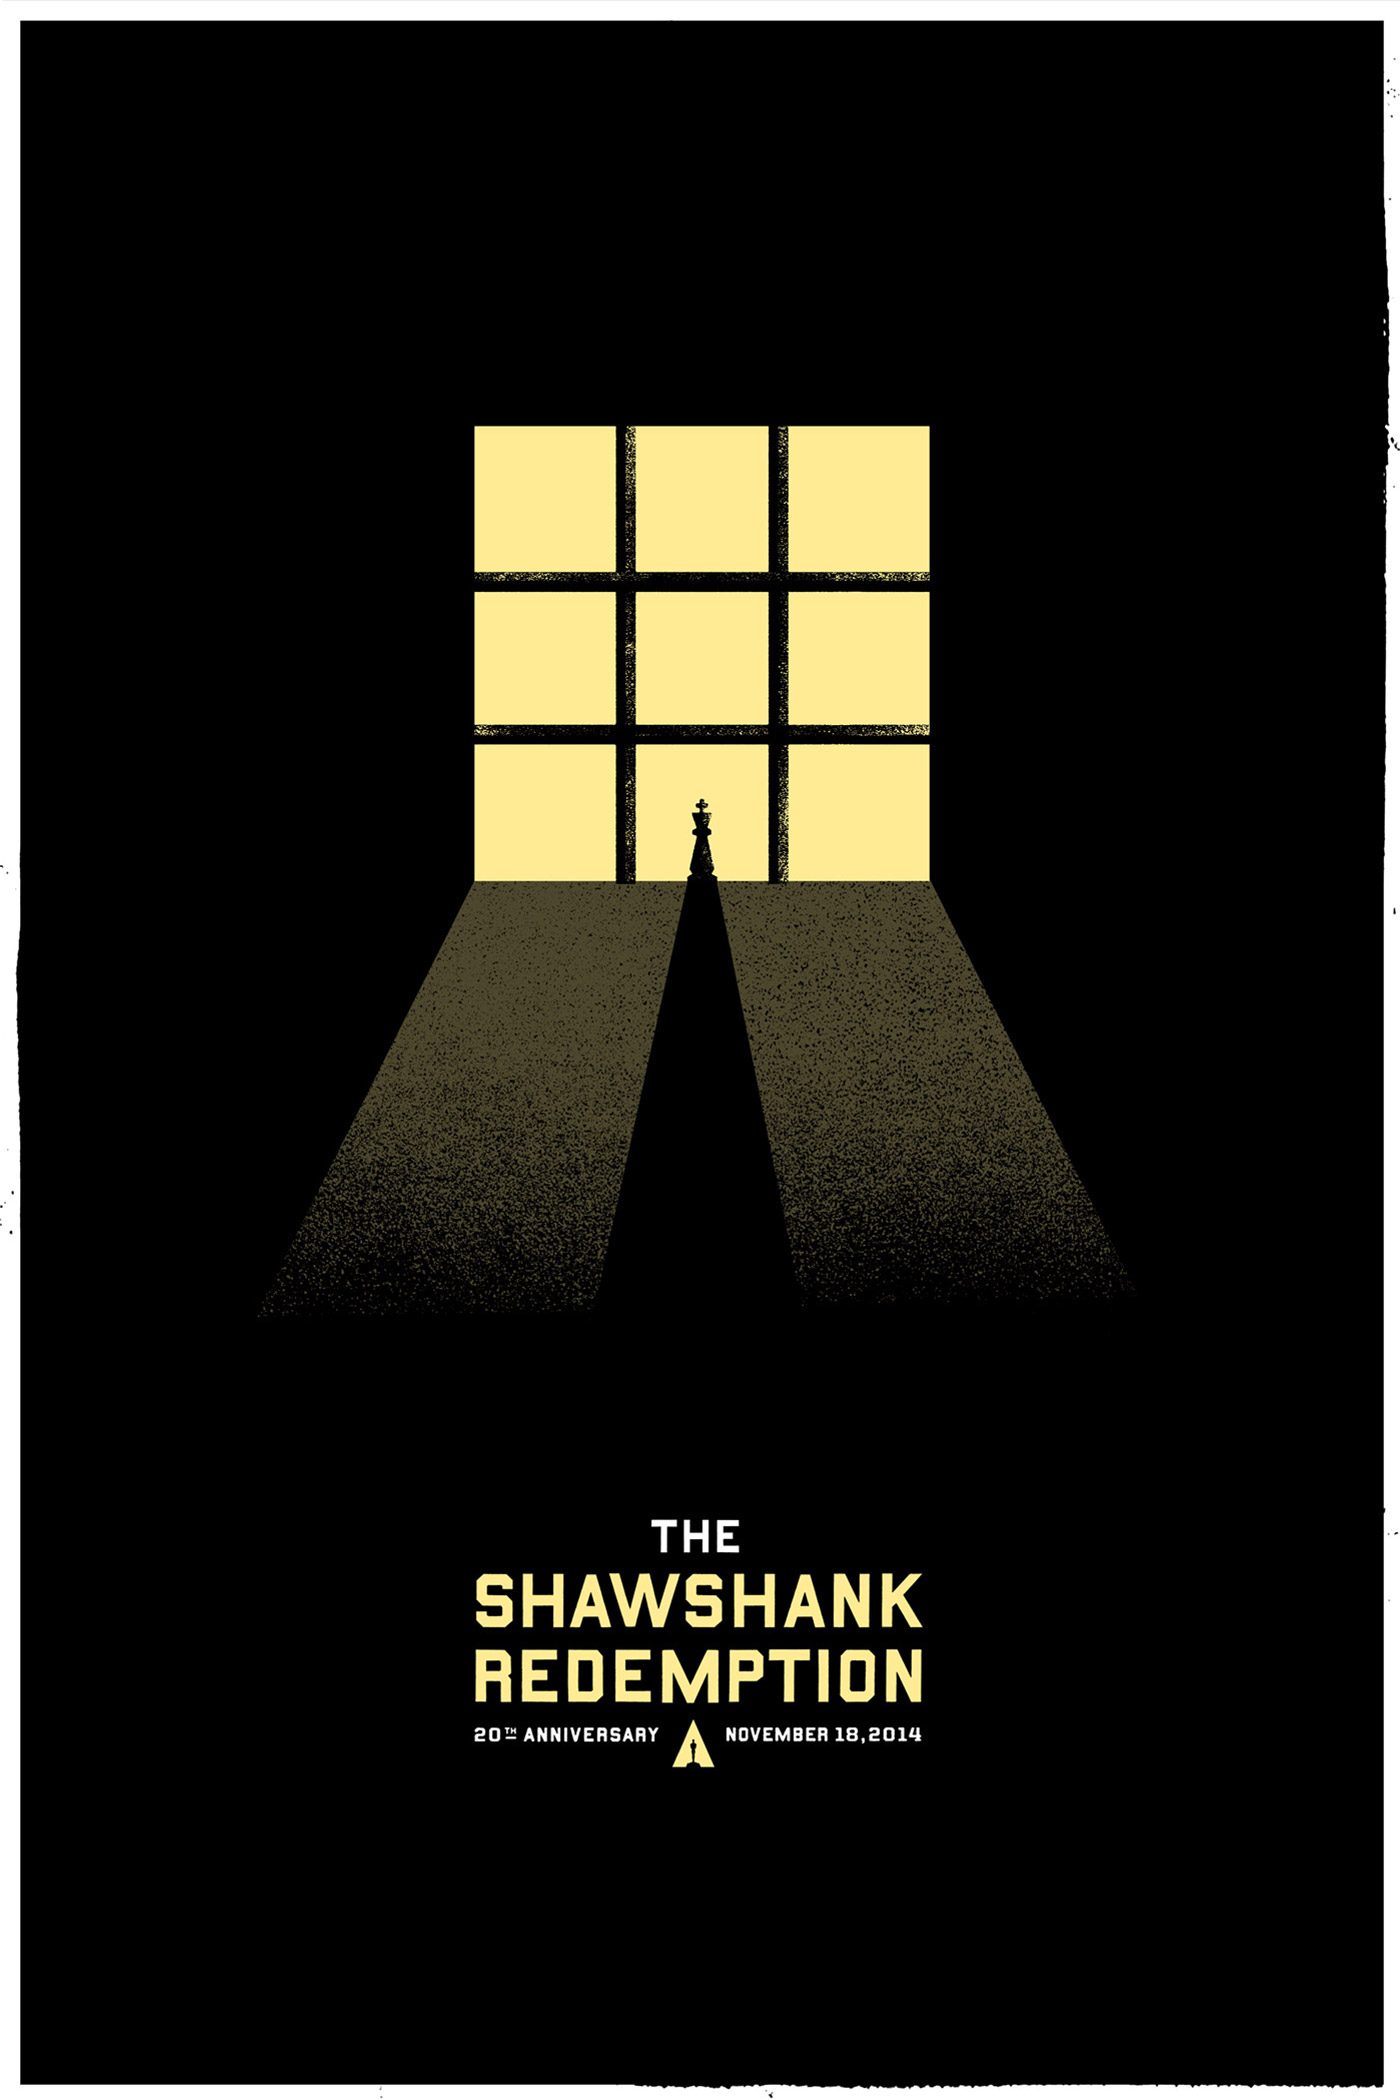 Shawshank Redemption Poster - The Heads of State